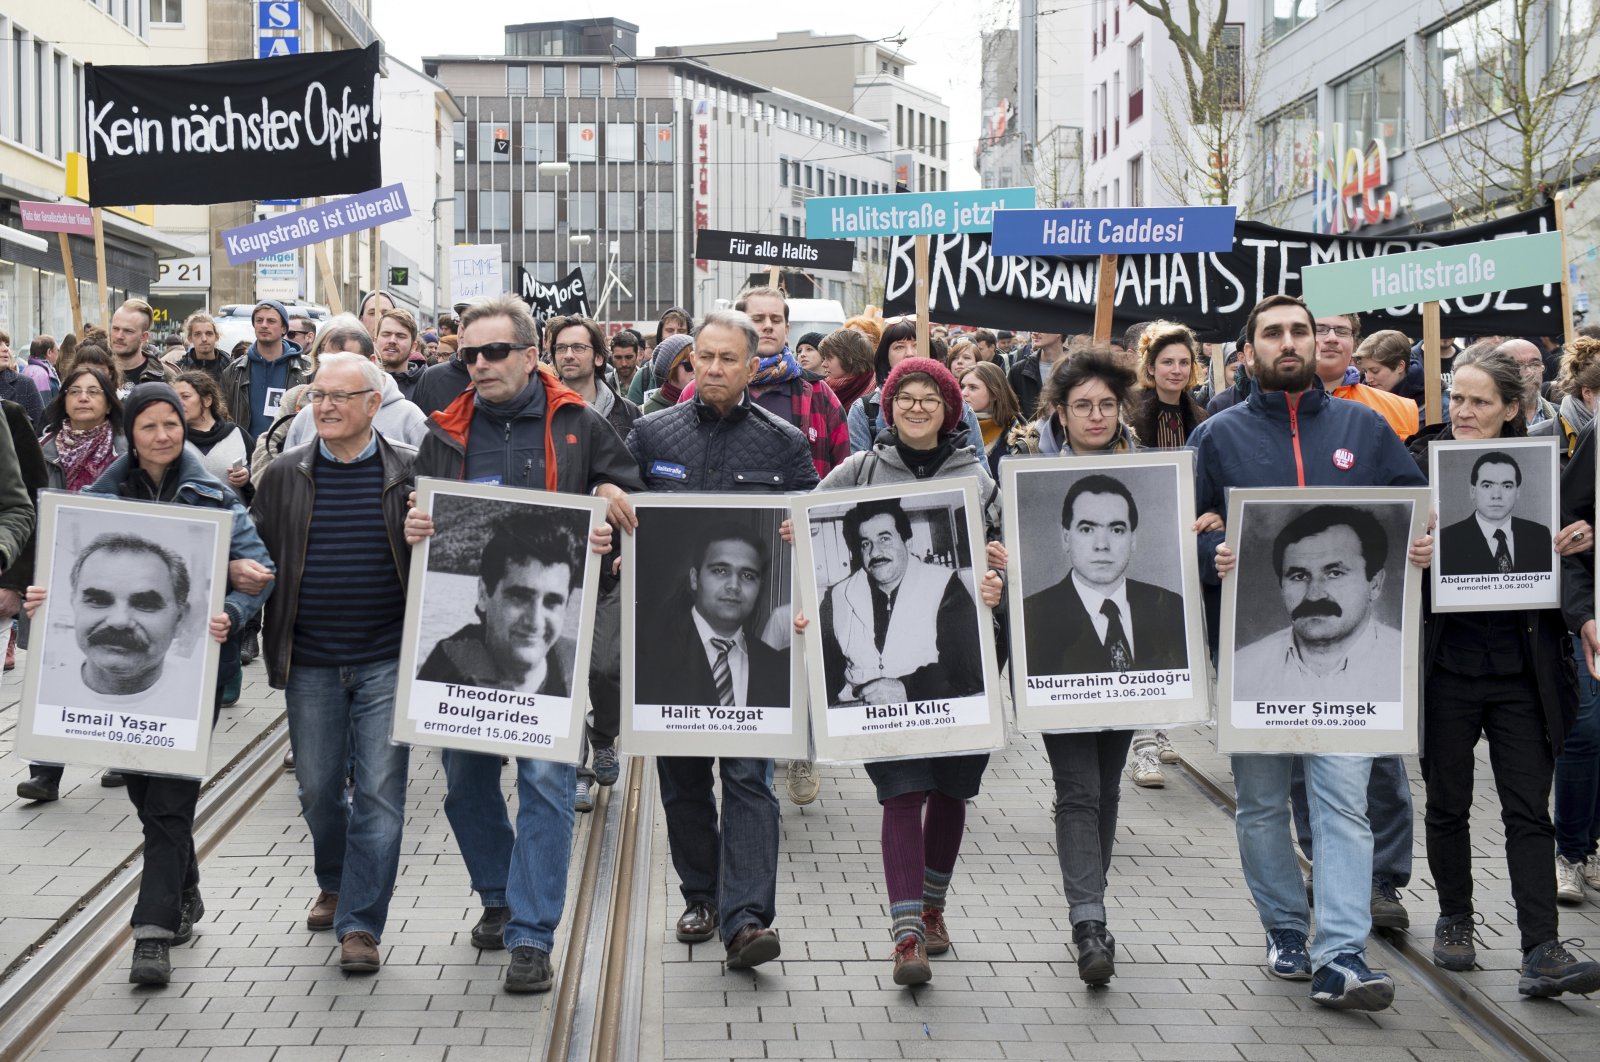 Participants of the demonstration "Kein Naechstes Opfer!" ("No other victim!") walk through the inner city of Kassel, Germany, April 6, 2017. (AP Photo)